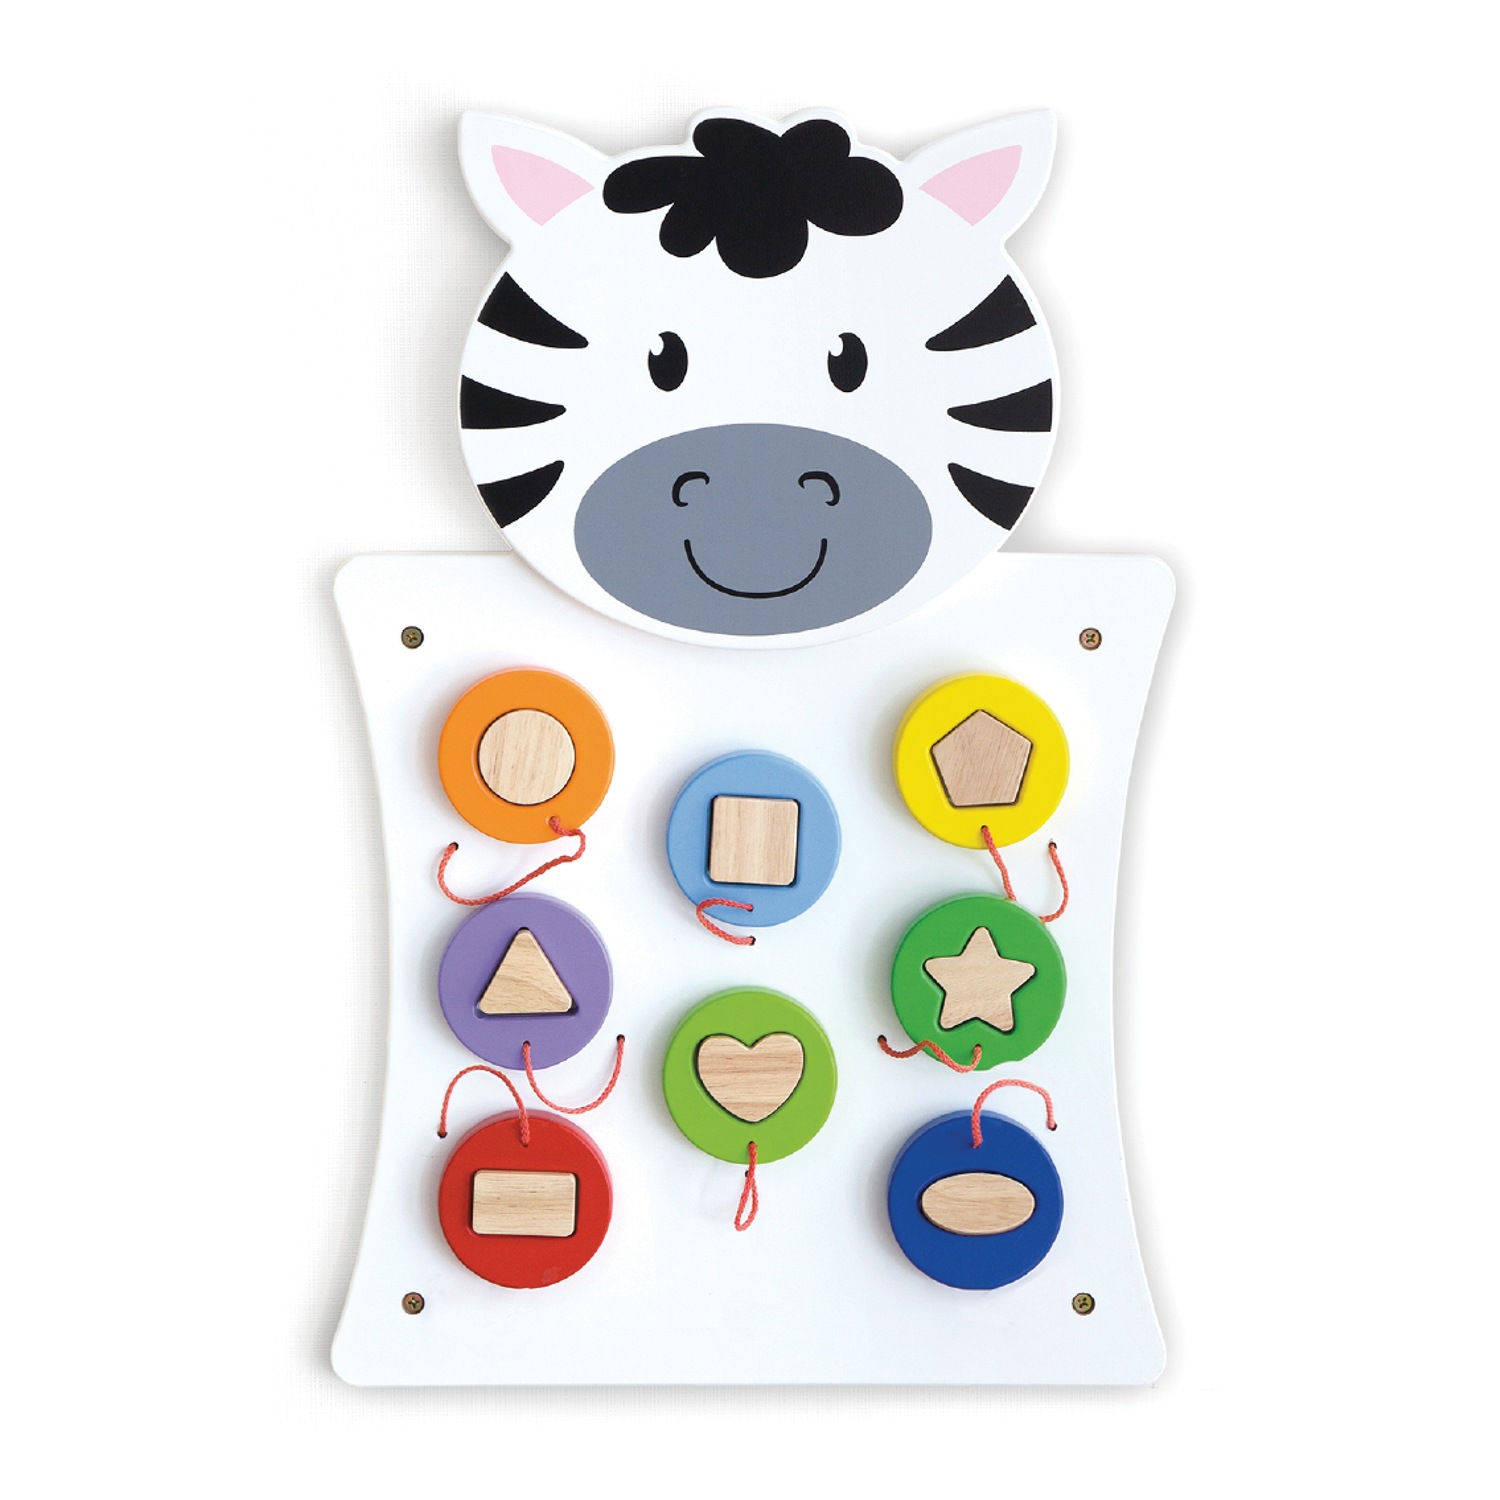 Learning Advantage Zebra Activity Wall Panel - Toddler Activity Center image number null